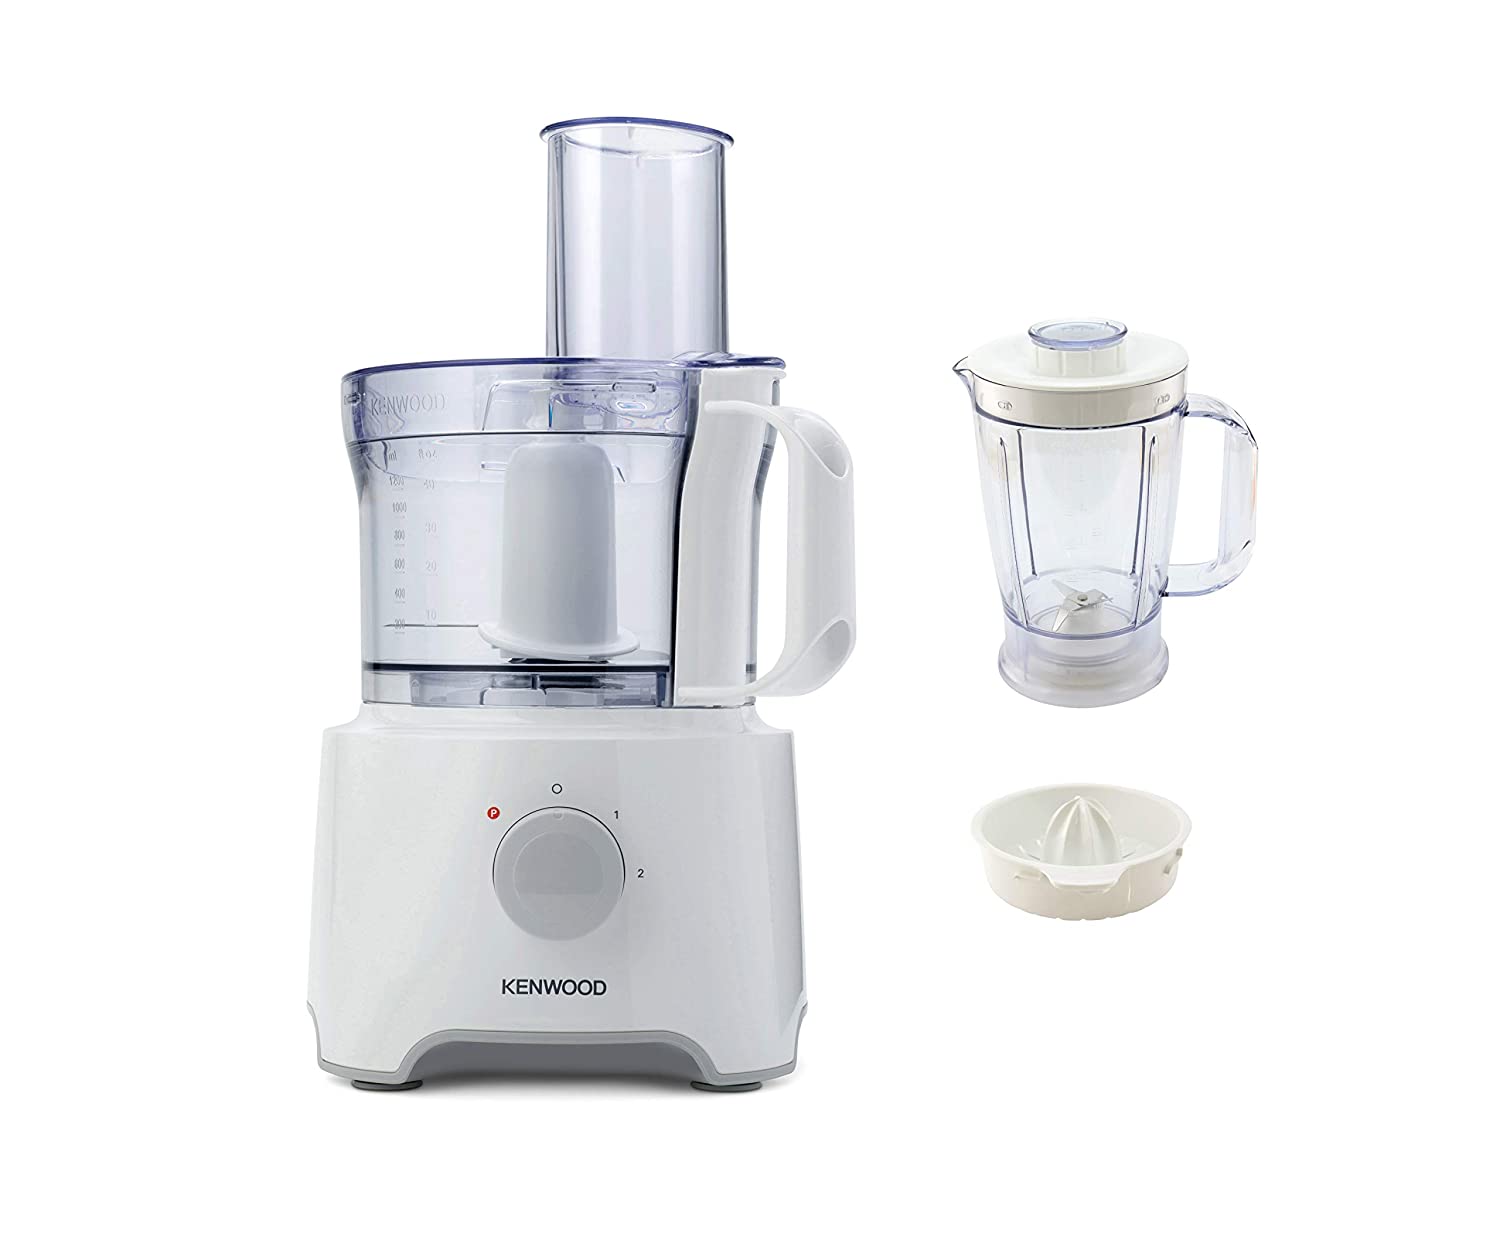 Frigidaire FD5115 Stainless Steel 3-in-1 Food Processor with Blender, 220 Volts